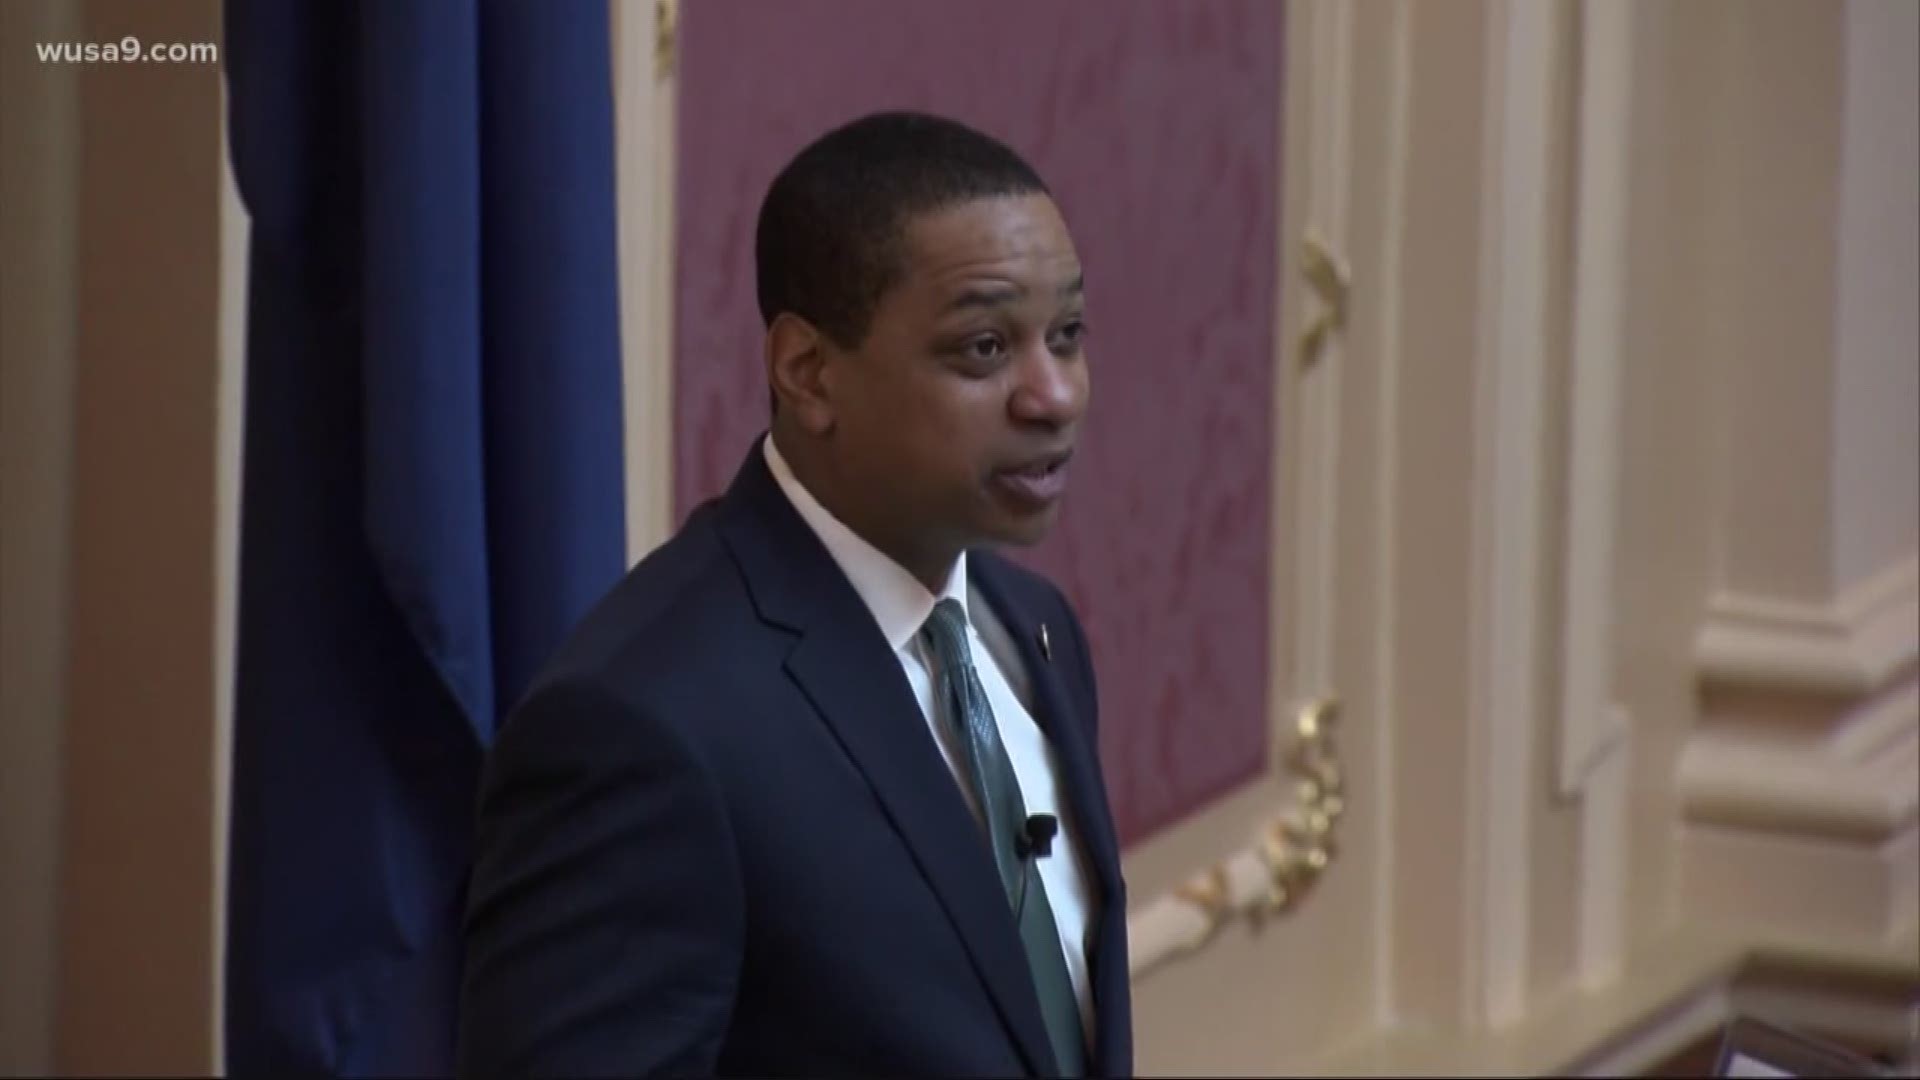 Further roiling Richmond after a week of scandal, lawyers alleged Virginia Lt. Gov. Justin Fairfax raped a classmate at Duke University in 2000.